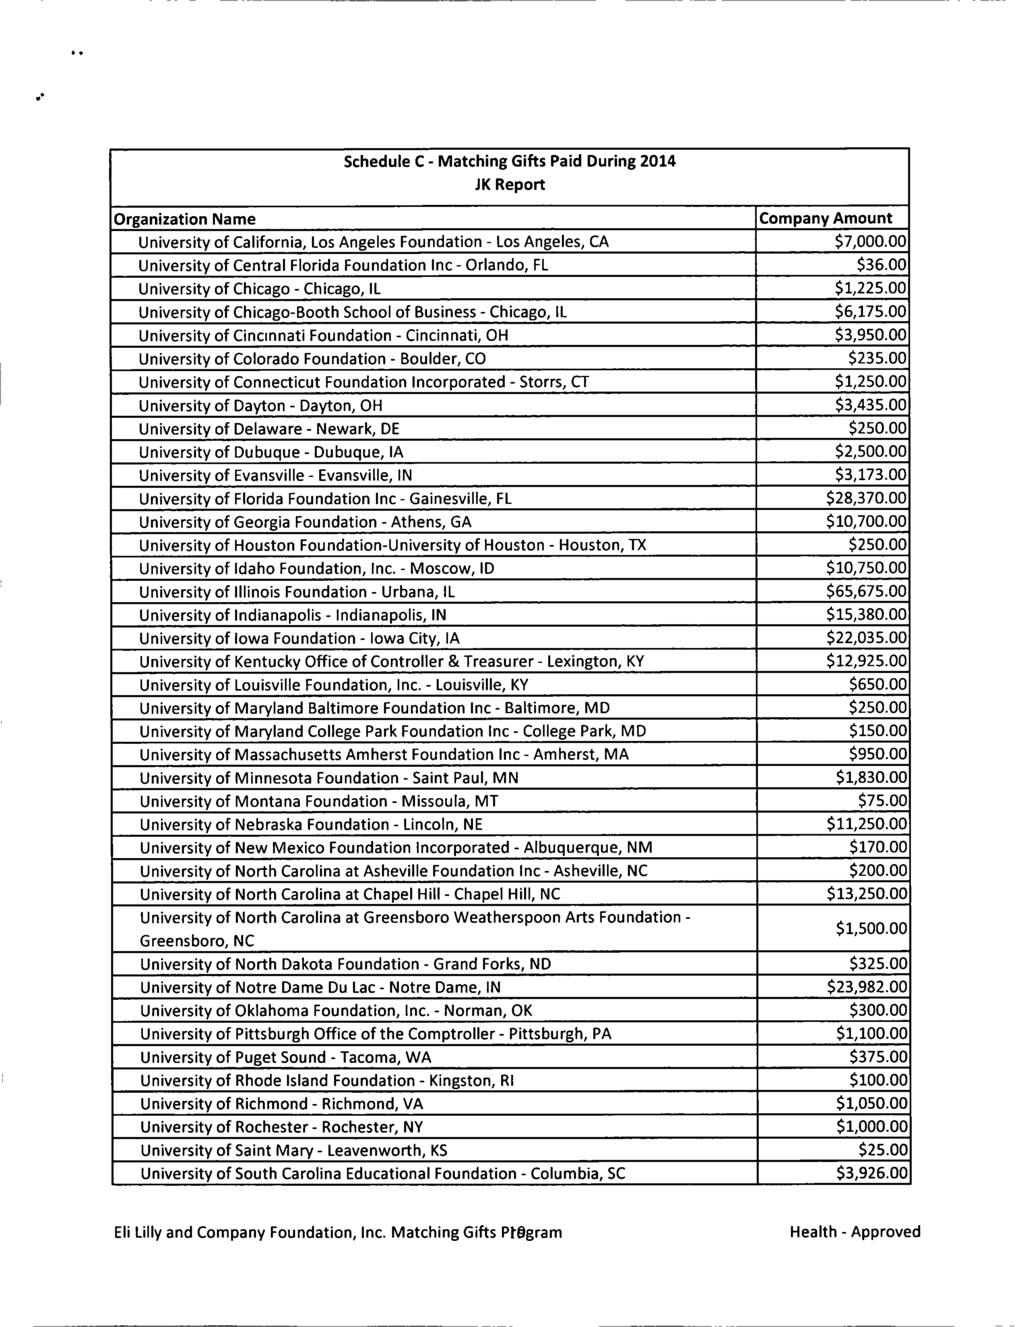 Organization Name Schedule C - Matching Gifts Paid During 2014 JK Report Company Amount University of California, Los Angeles Foundation - Los Angeles, CA $7,000.